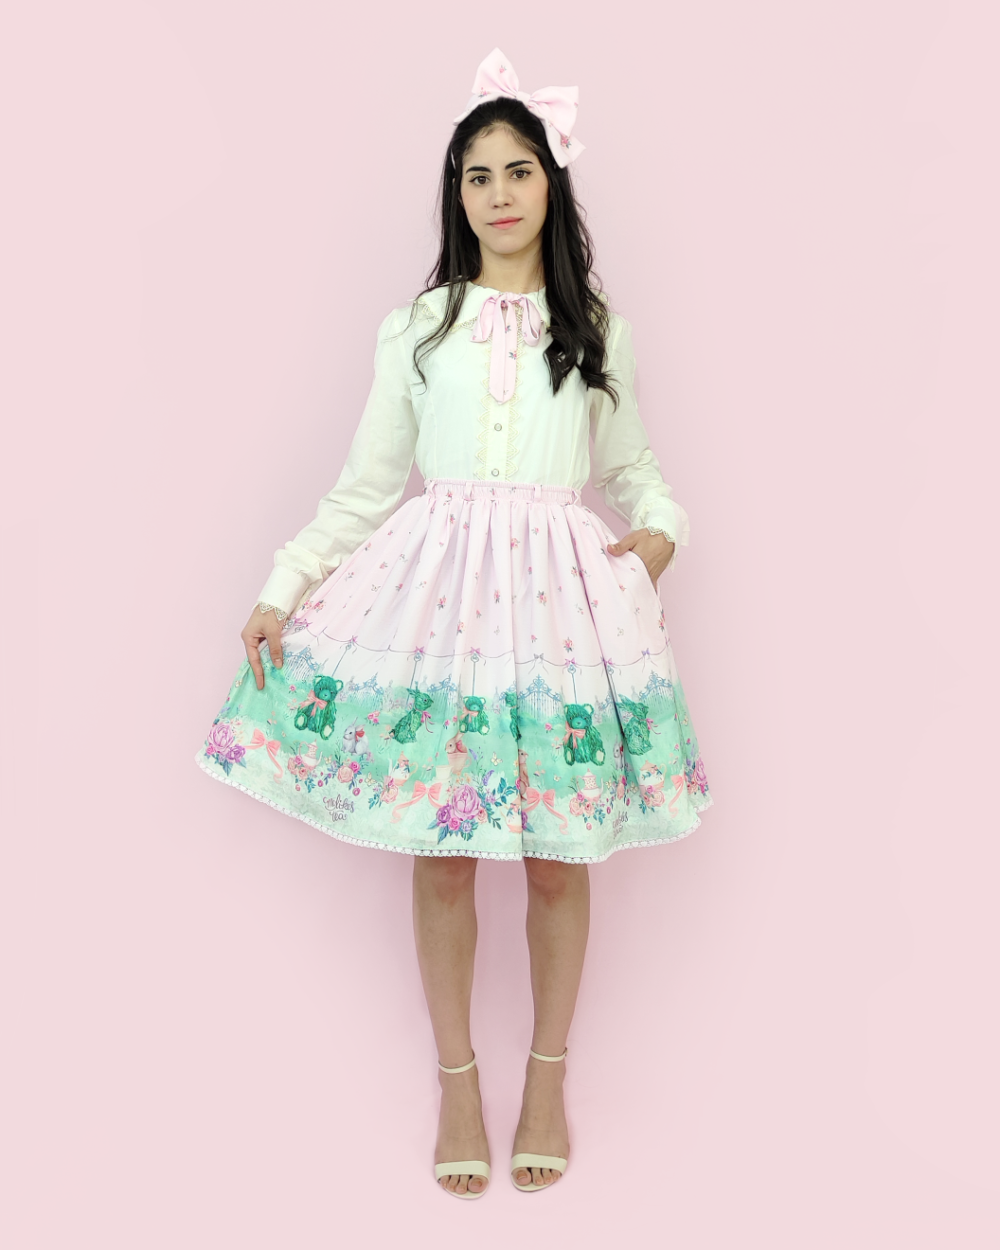 Model wearing skirt made of pink polyester printed with a garden full of bunnies, teddy bears, cups and teapots, flowers and a beautiful lawn.